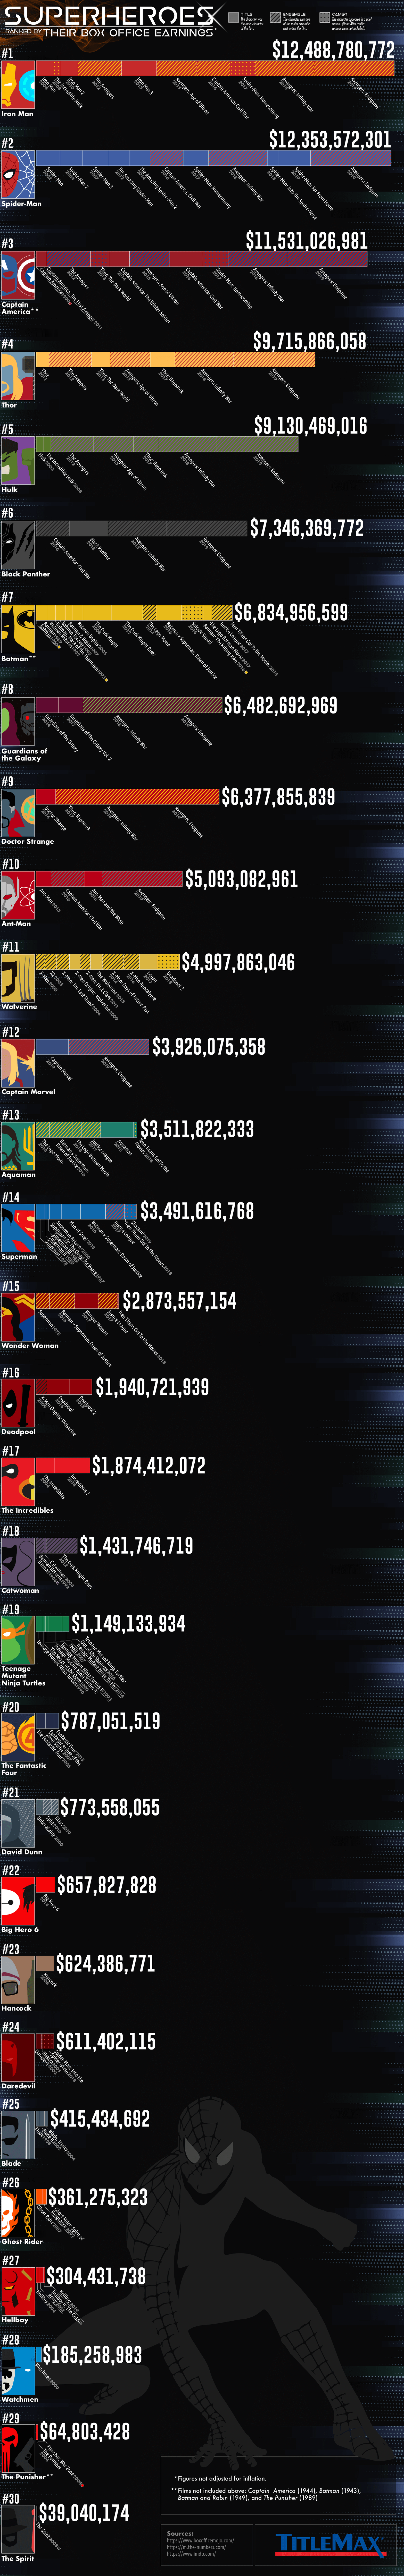 Which Superheroes Have Made the Most Money at the Box Office